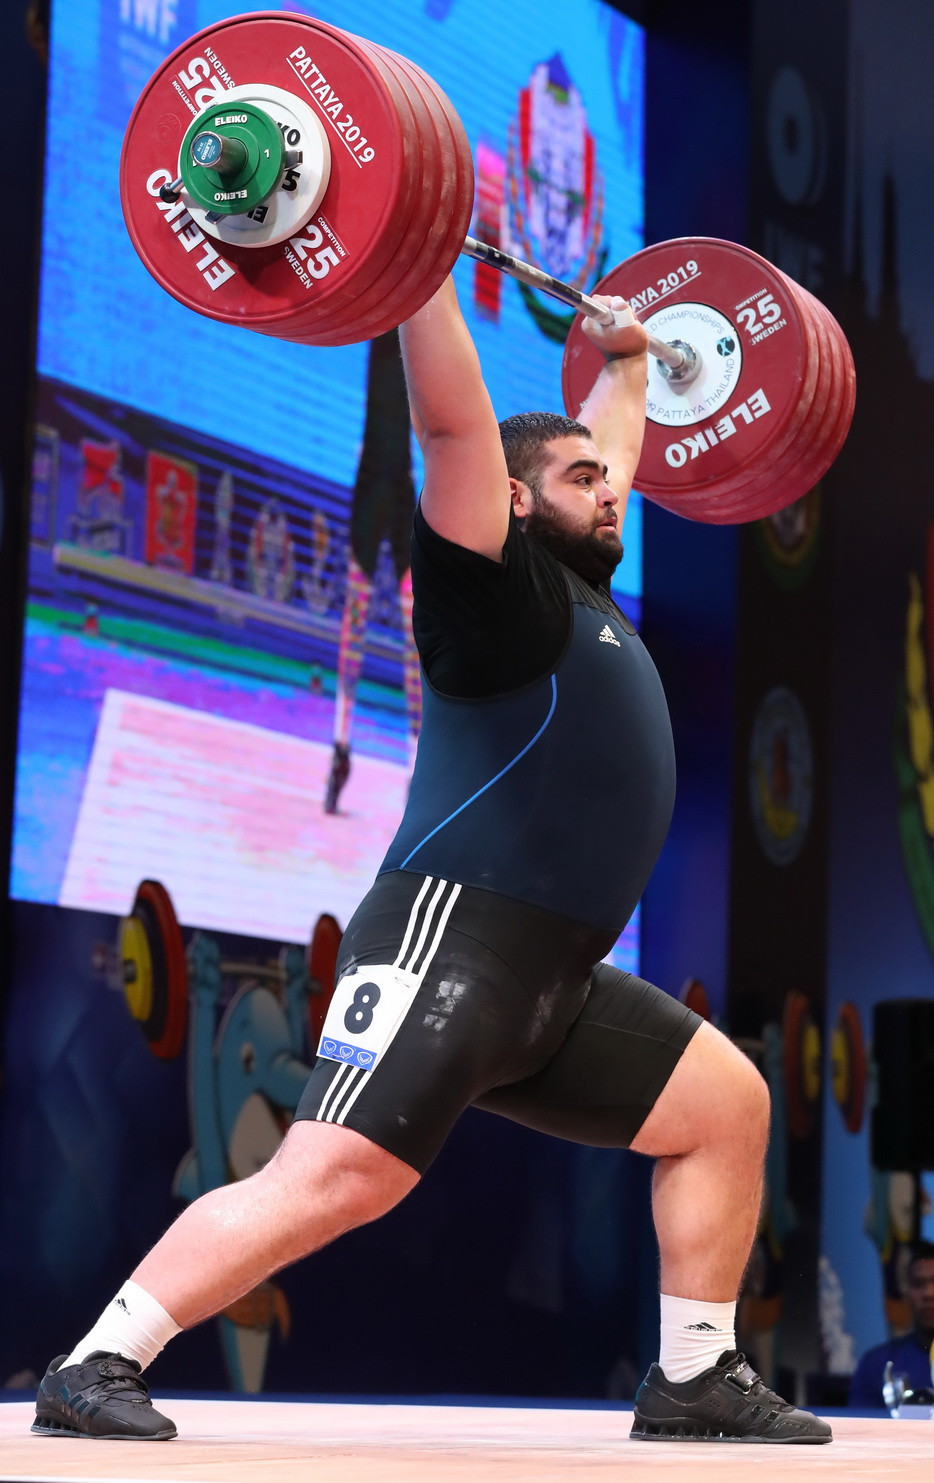 Armenia’s Gor Minasyan had to settle for all three silver medals ©IWF